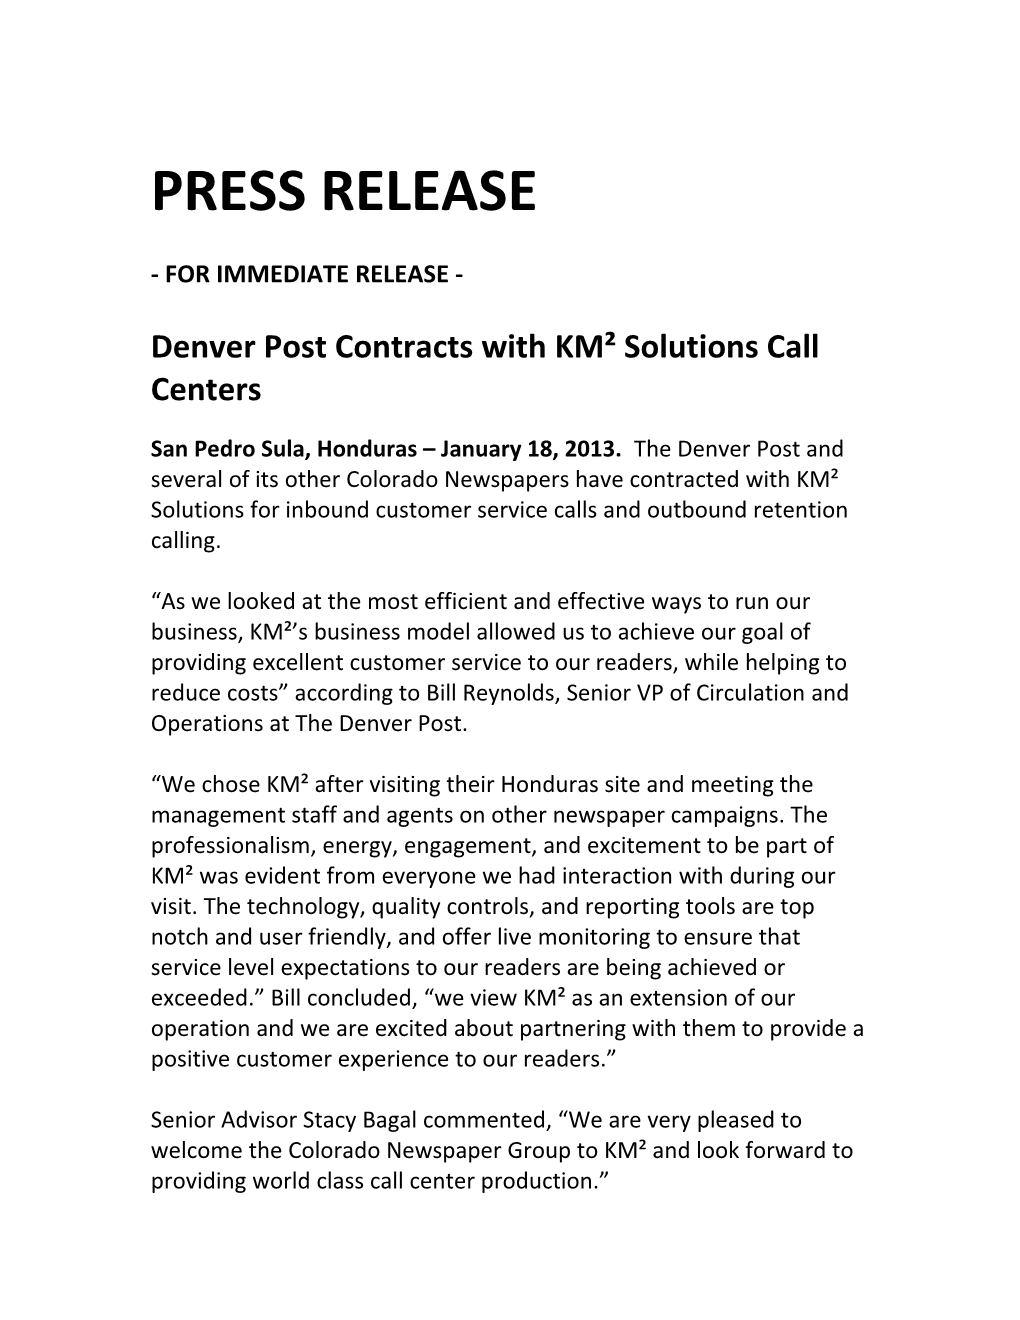 Denver Post Contracts with KM Solutions Call Centers